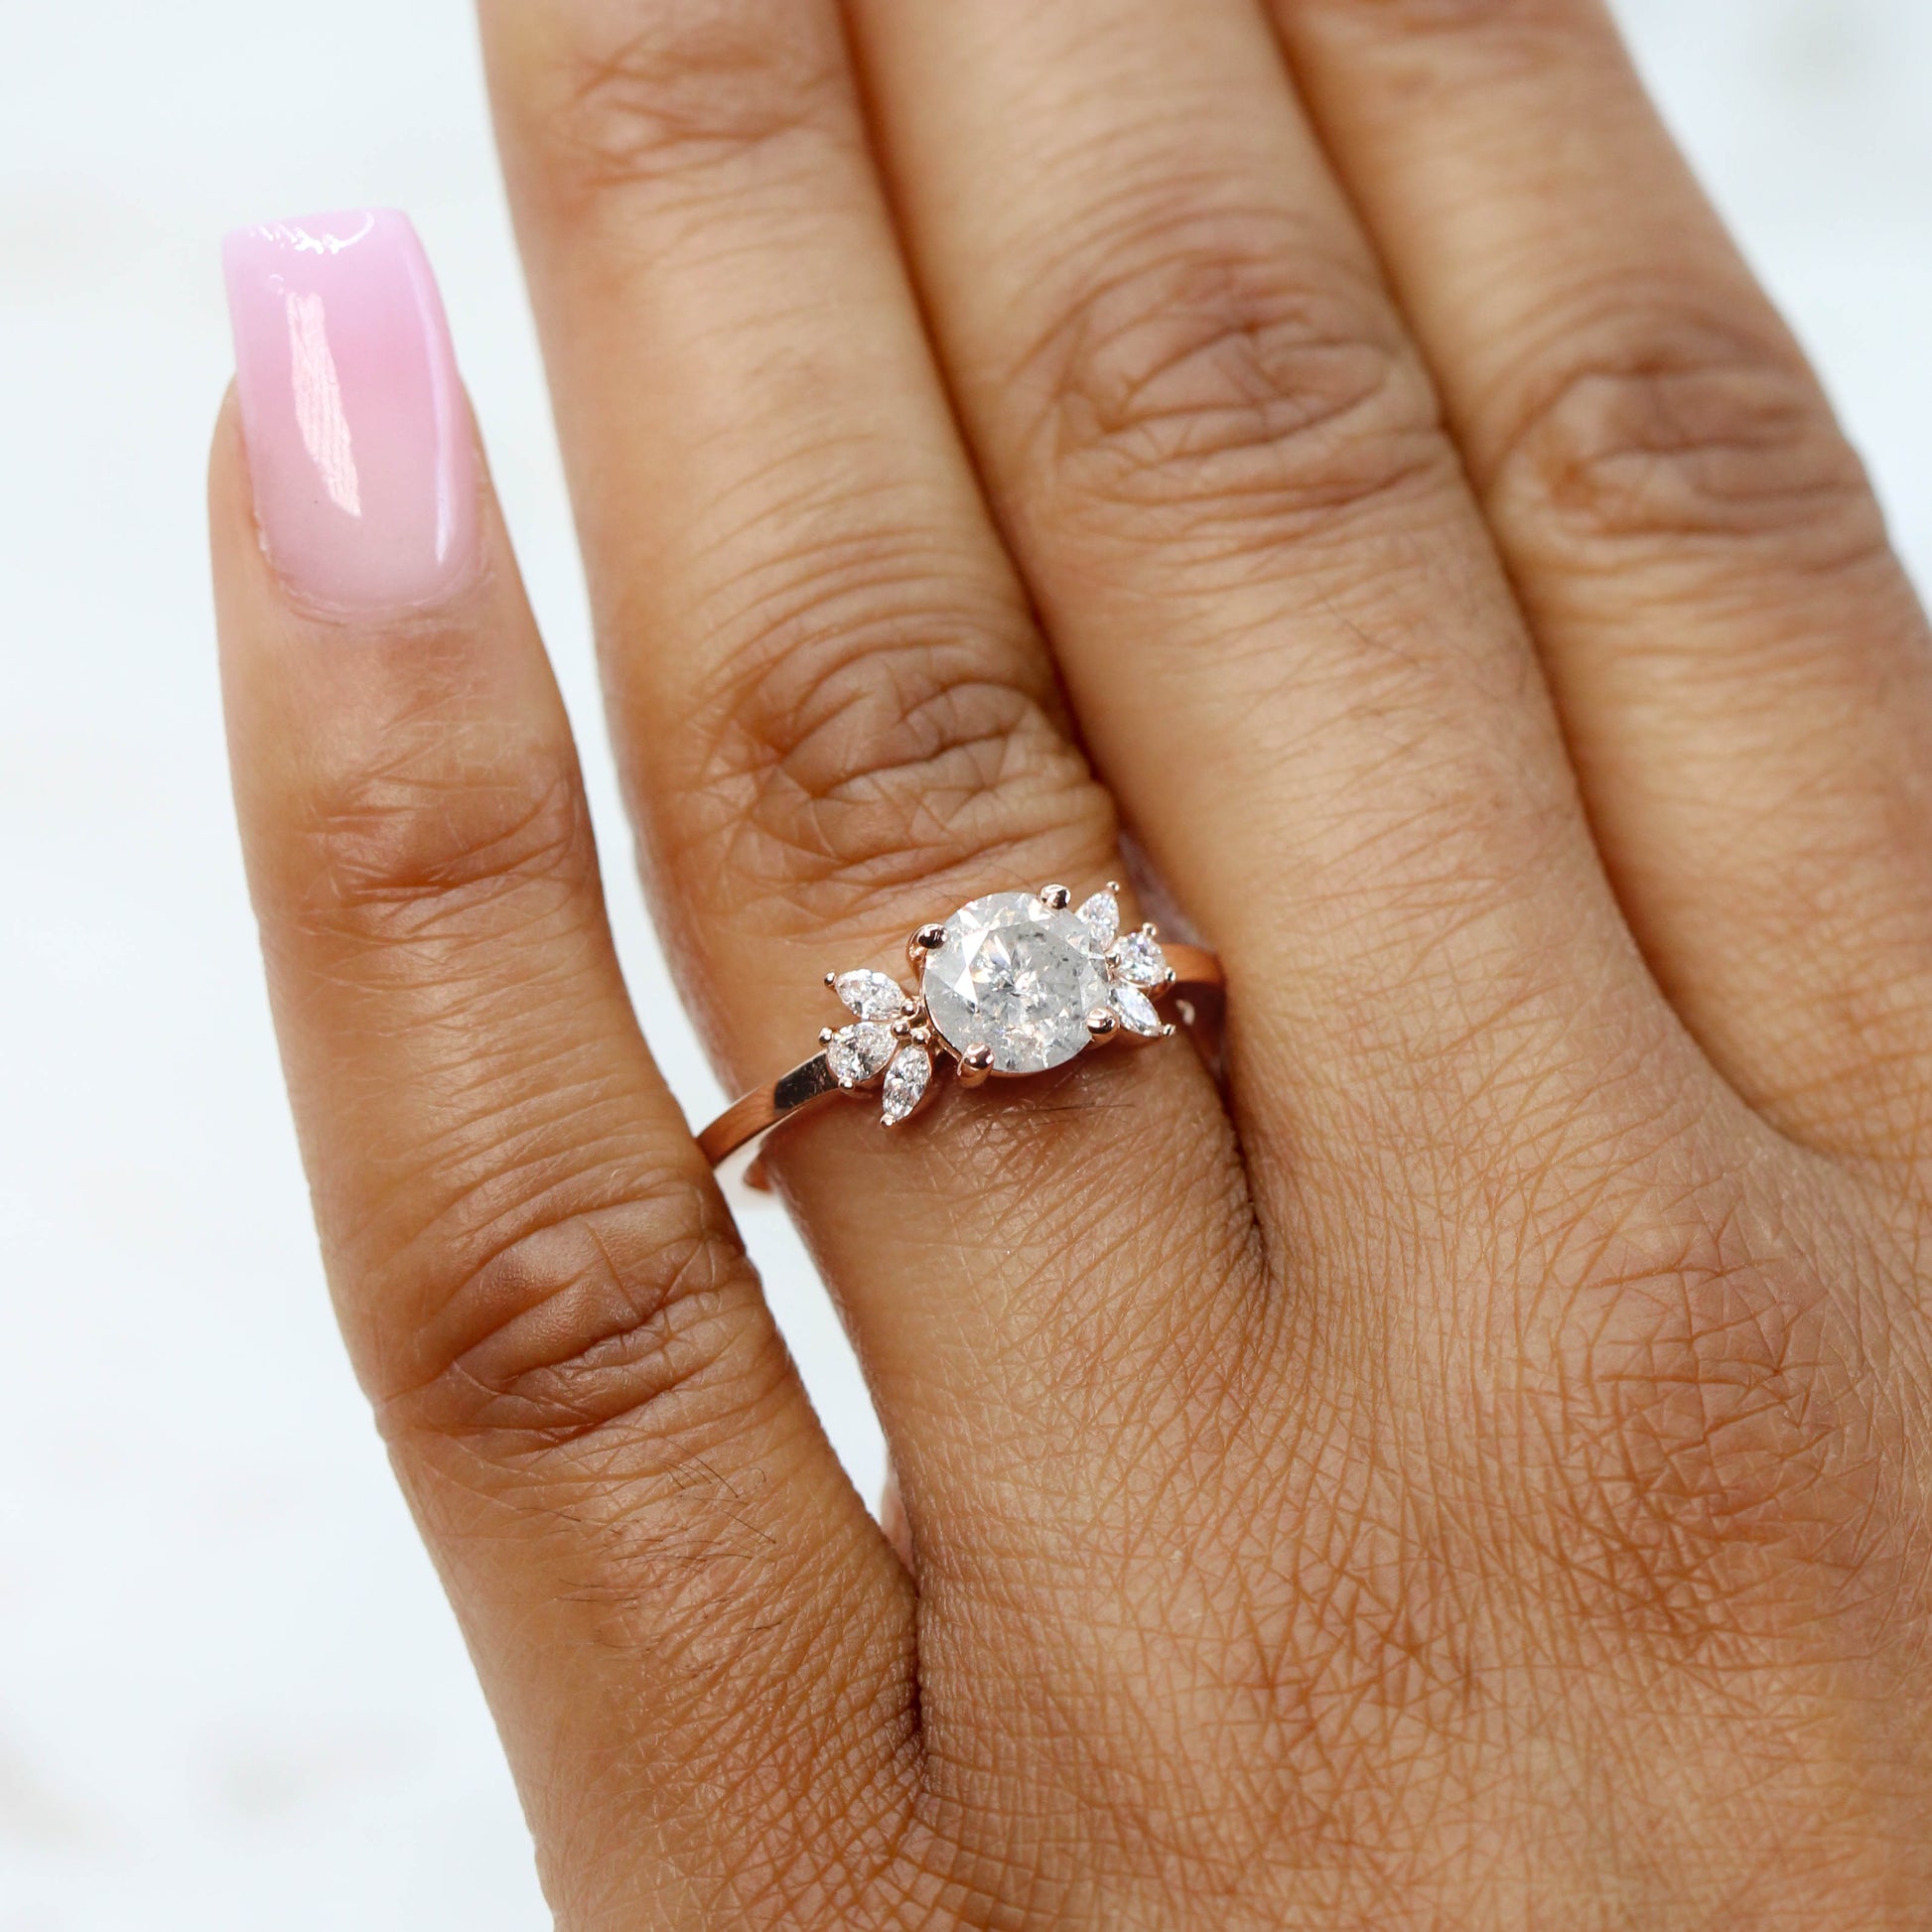 Kendra Ring with a 1.17 Carat Round Bright Gray Salt and Pepper Diamond with White Diamond Accents in 14k Rose Gold - Ready to Size and Ship - Midwinter Co. Alternative Bridal Rings and Modern Fine Jewelry